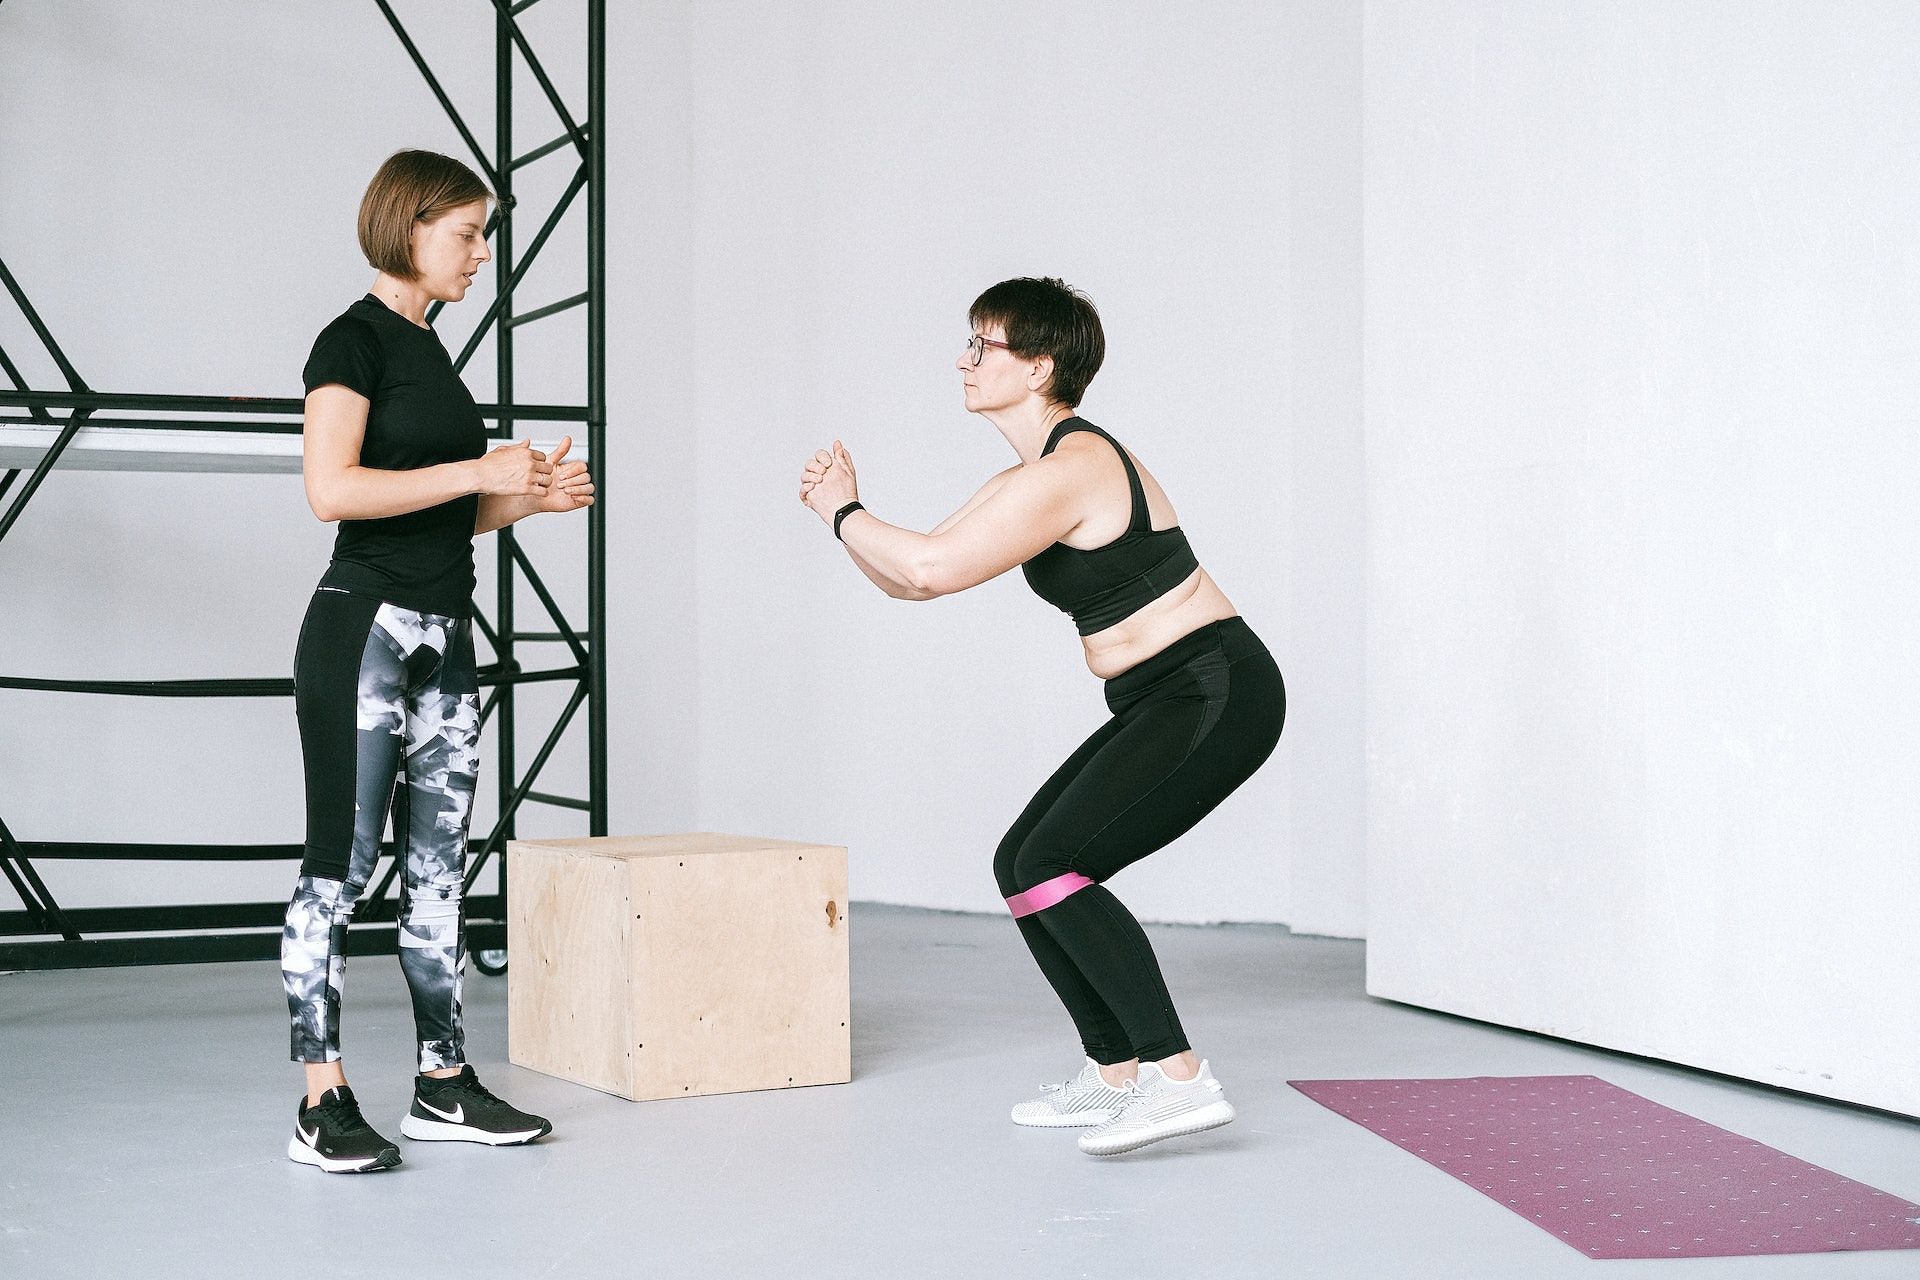 Squats are suitable for older adults. (Photo via Pexels/Anna Shvets)